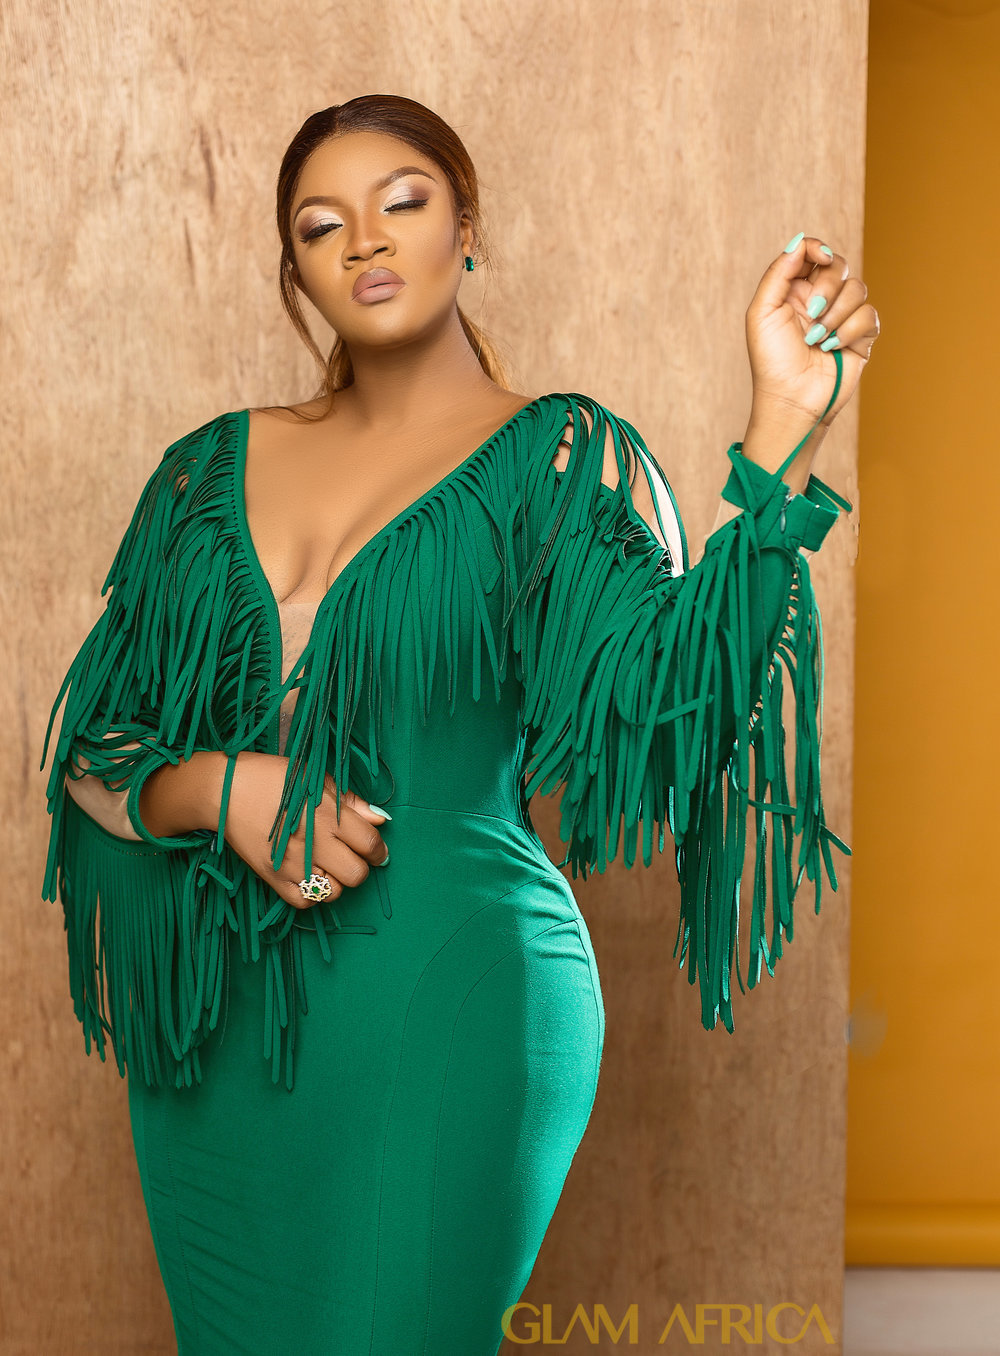 She is Called Omosexy for a Reason, Here are the Hot & Spicy Photos from